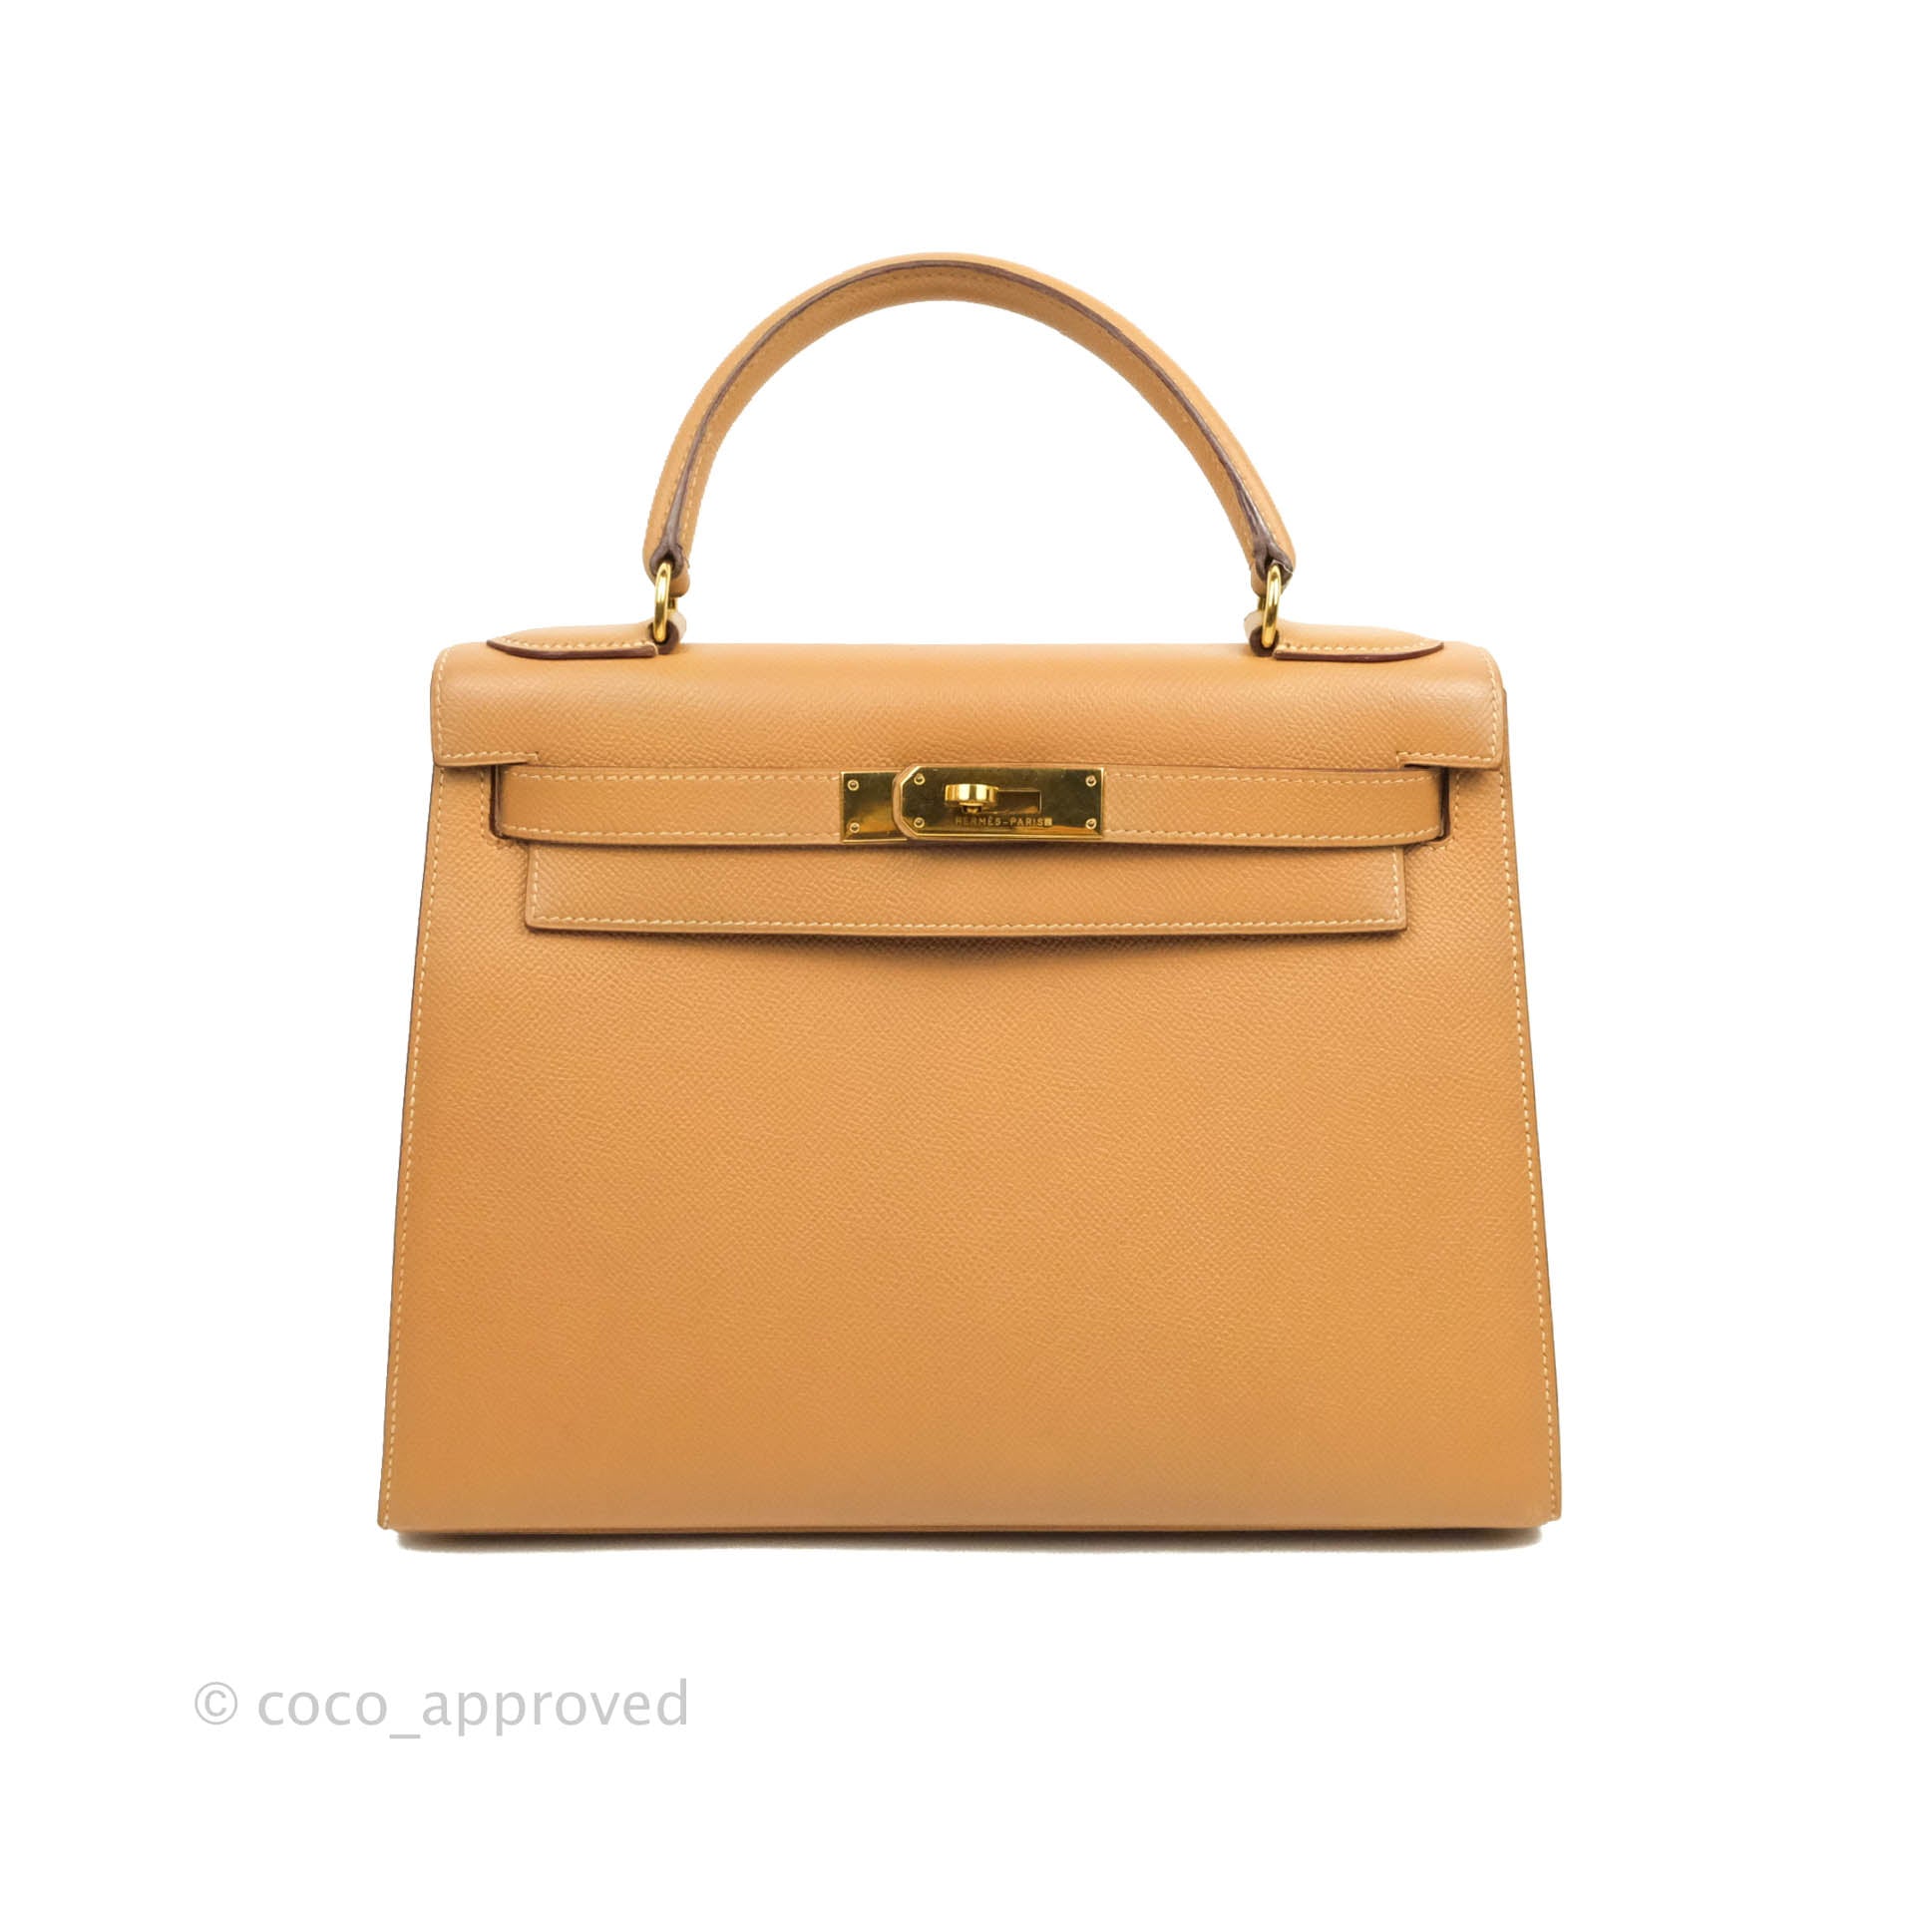 Hermes Kelly Bag Size 28 Epsom Leather in Gold Color with Silk